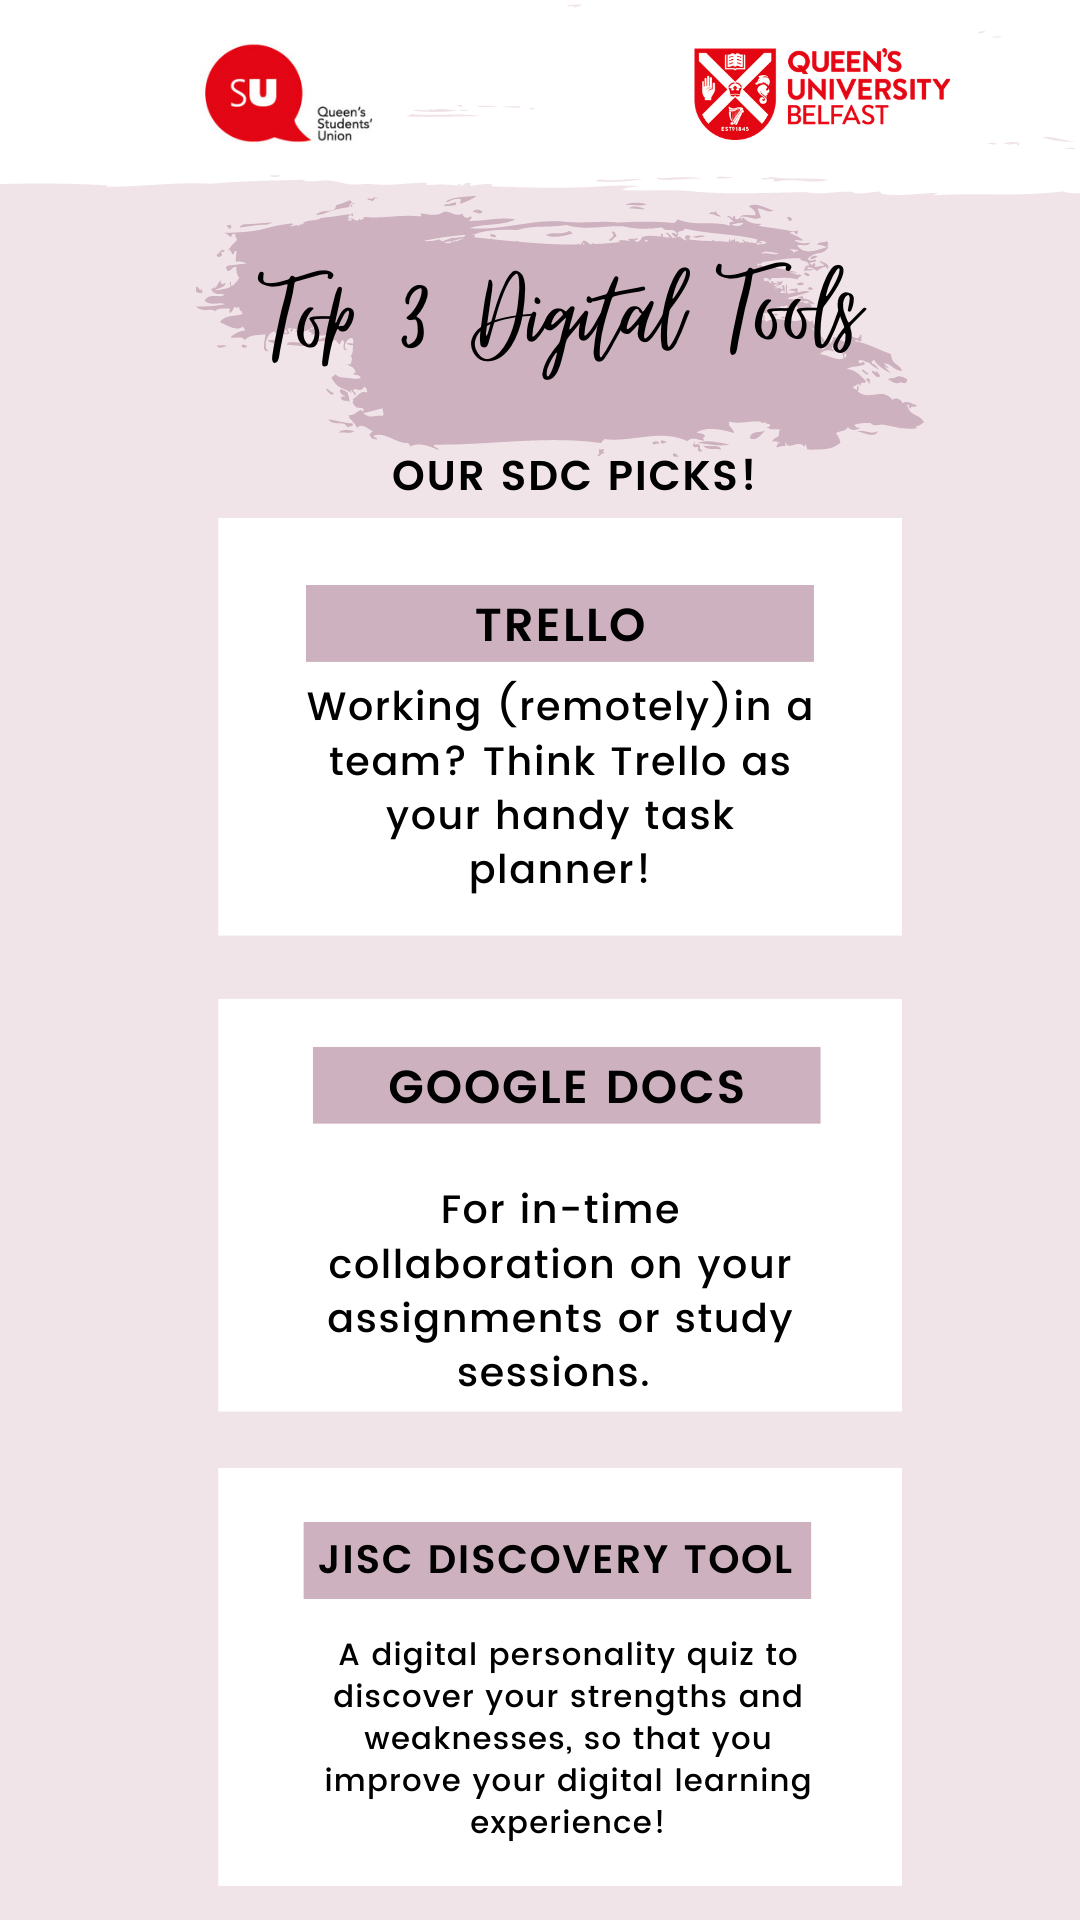 Lilac poster with 3 top digital picks - trello, google docs and jisc discovery tool